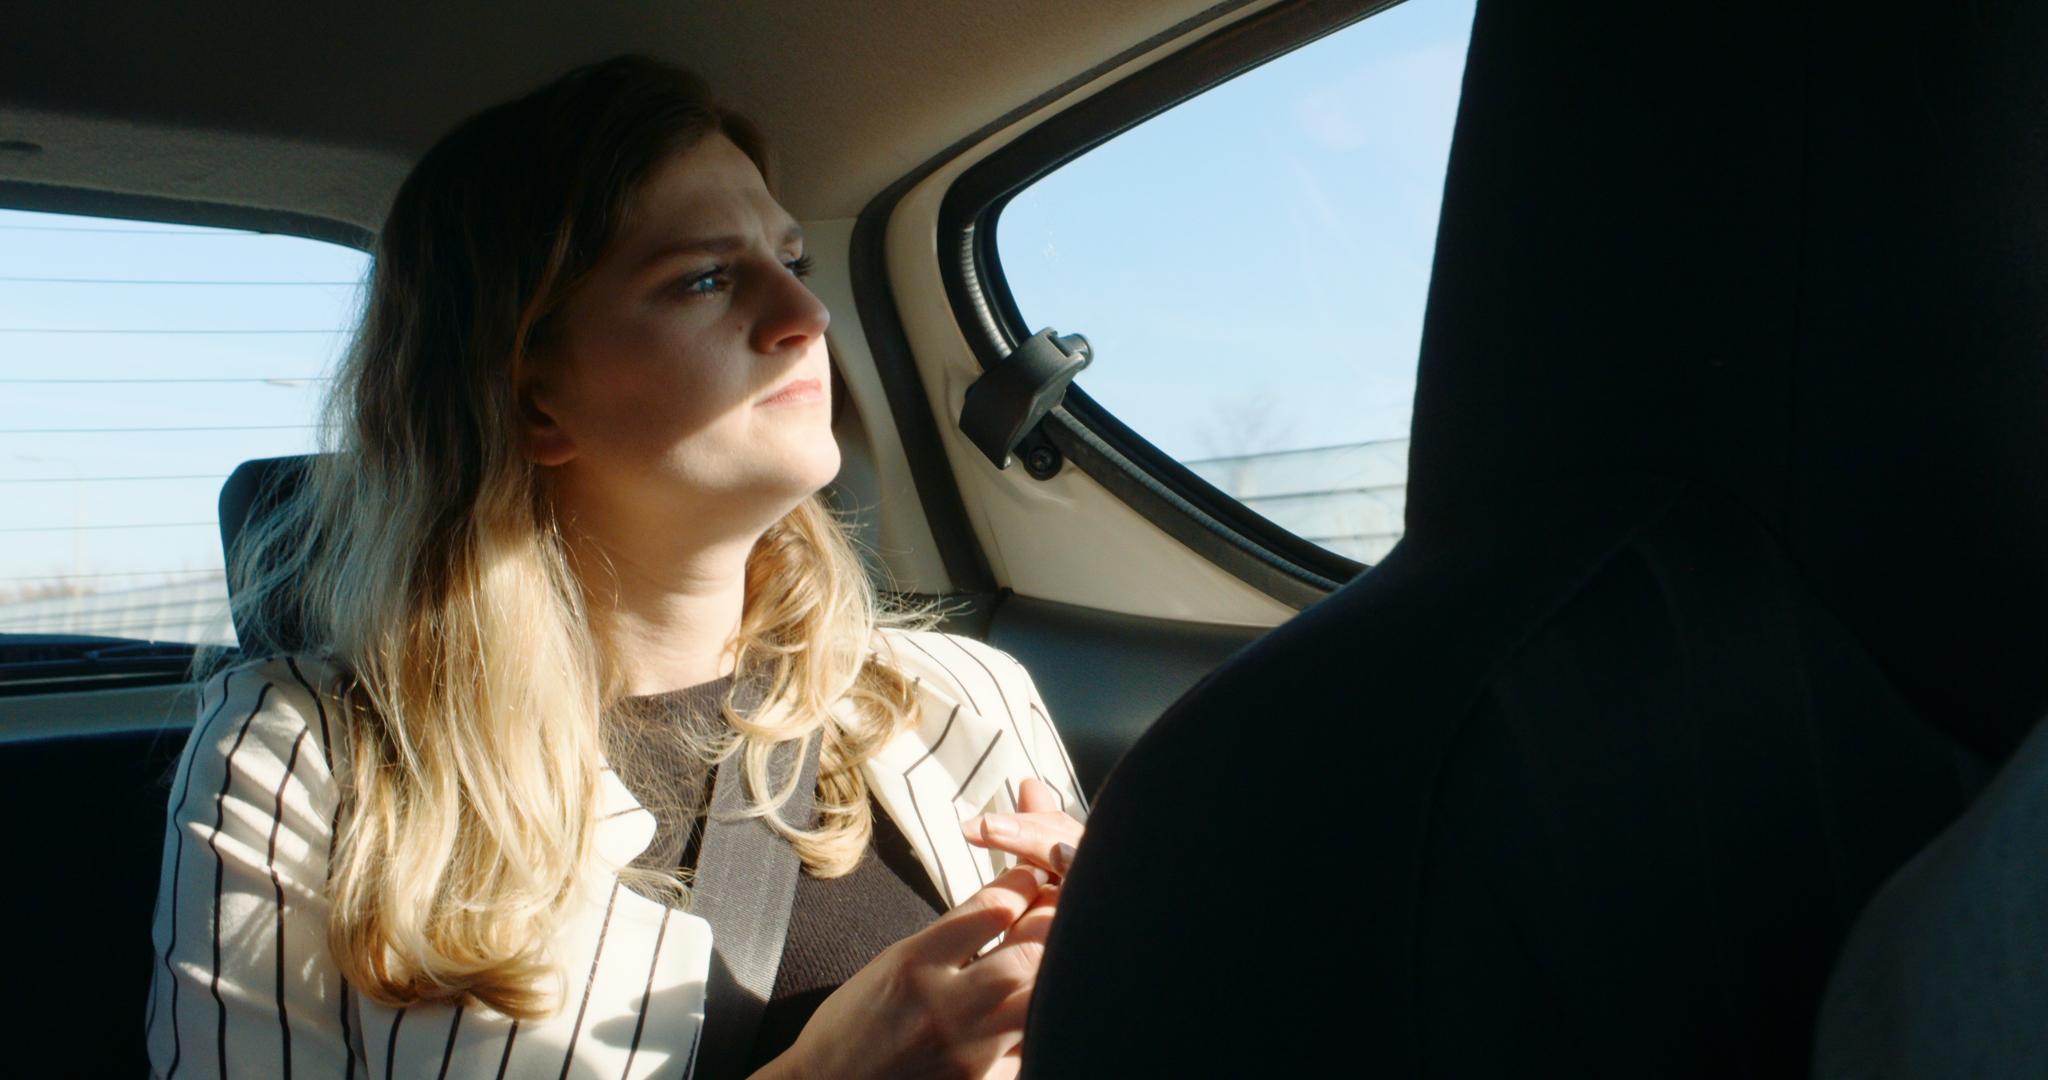 Still from Momentum. Carline is sitting in the back seat of a car and staring out of the window pensively. She's wearing a black top with a white pinstriped blazer. It's sunny.